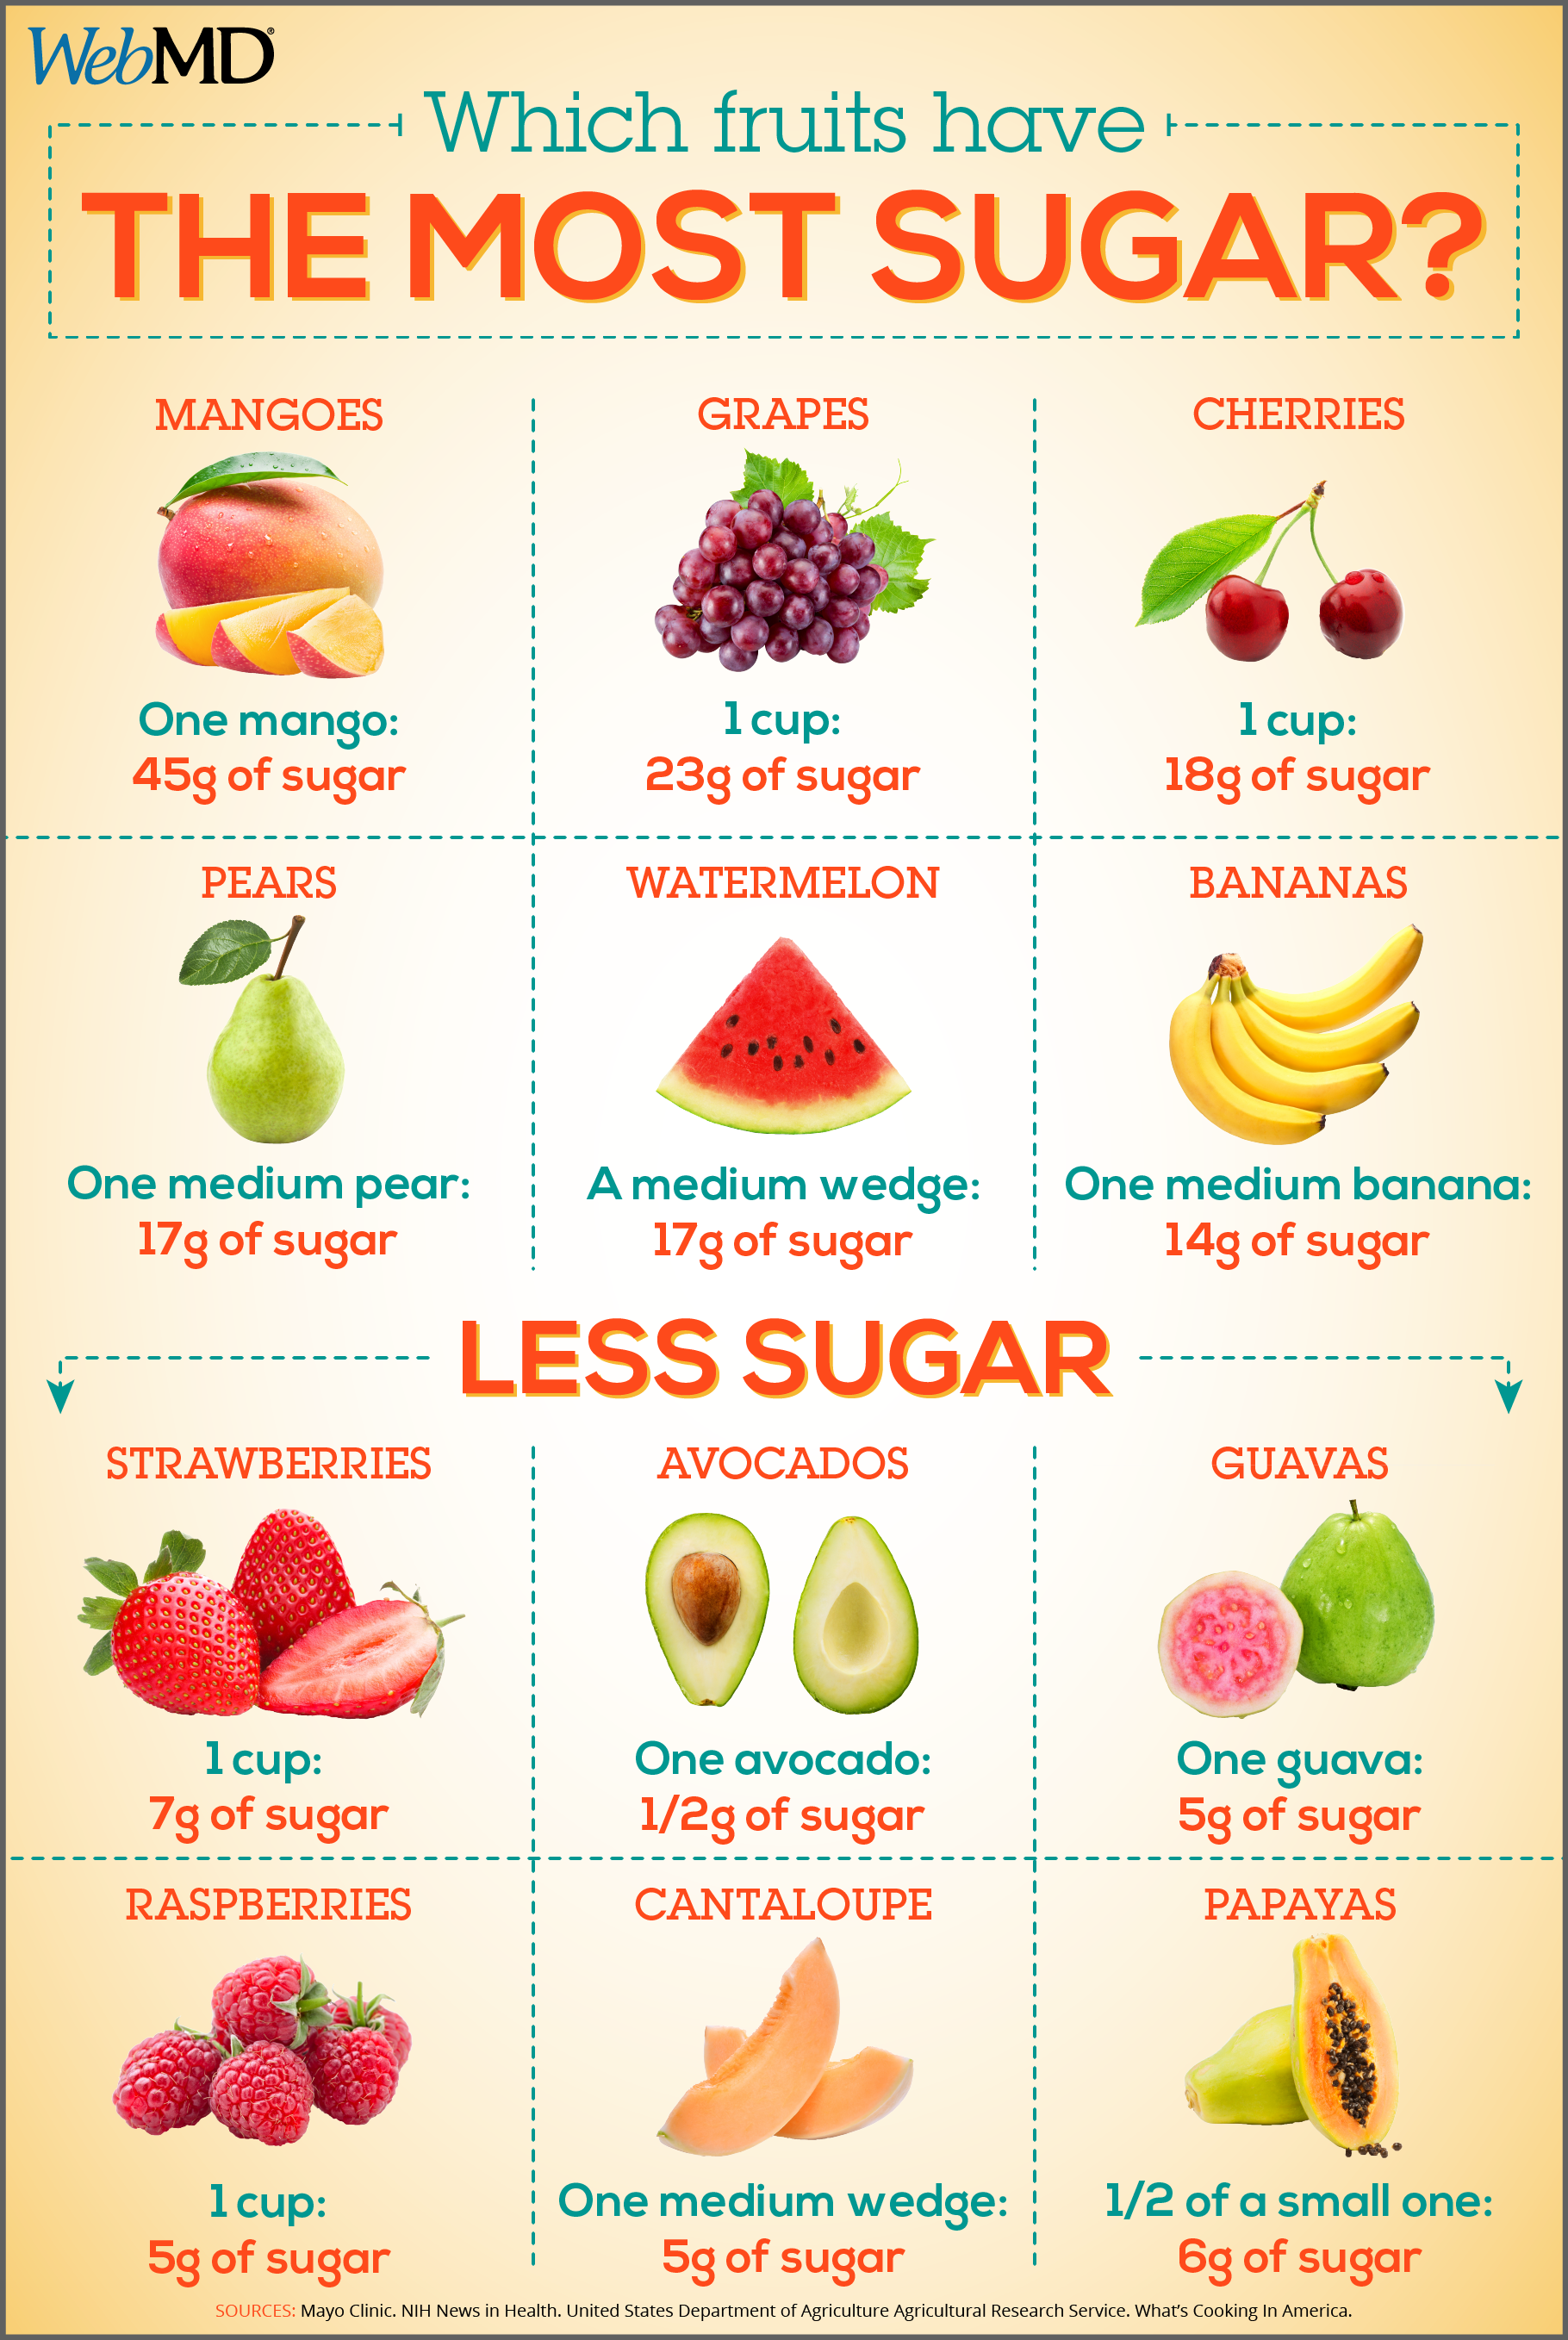 Which Fruits Have the Most Sugar?